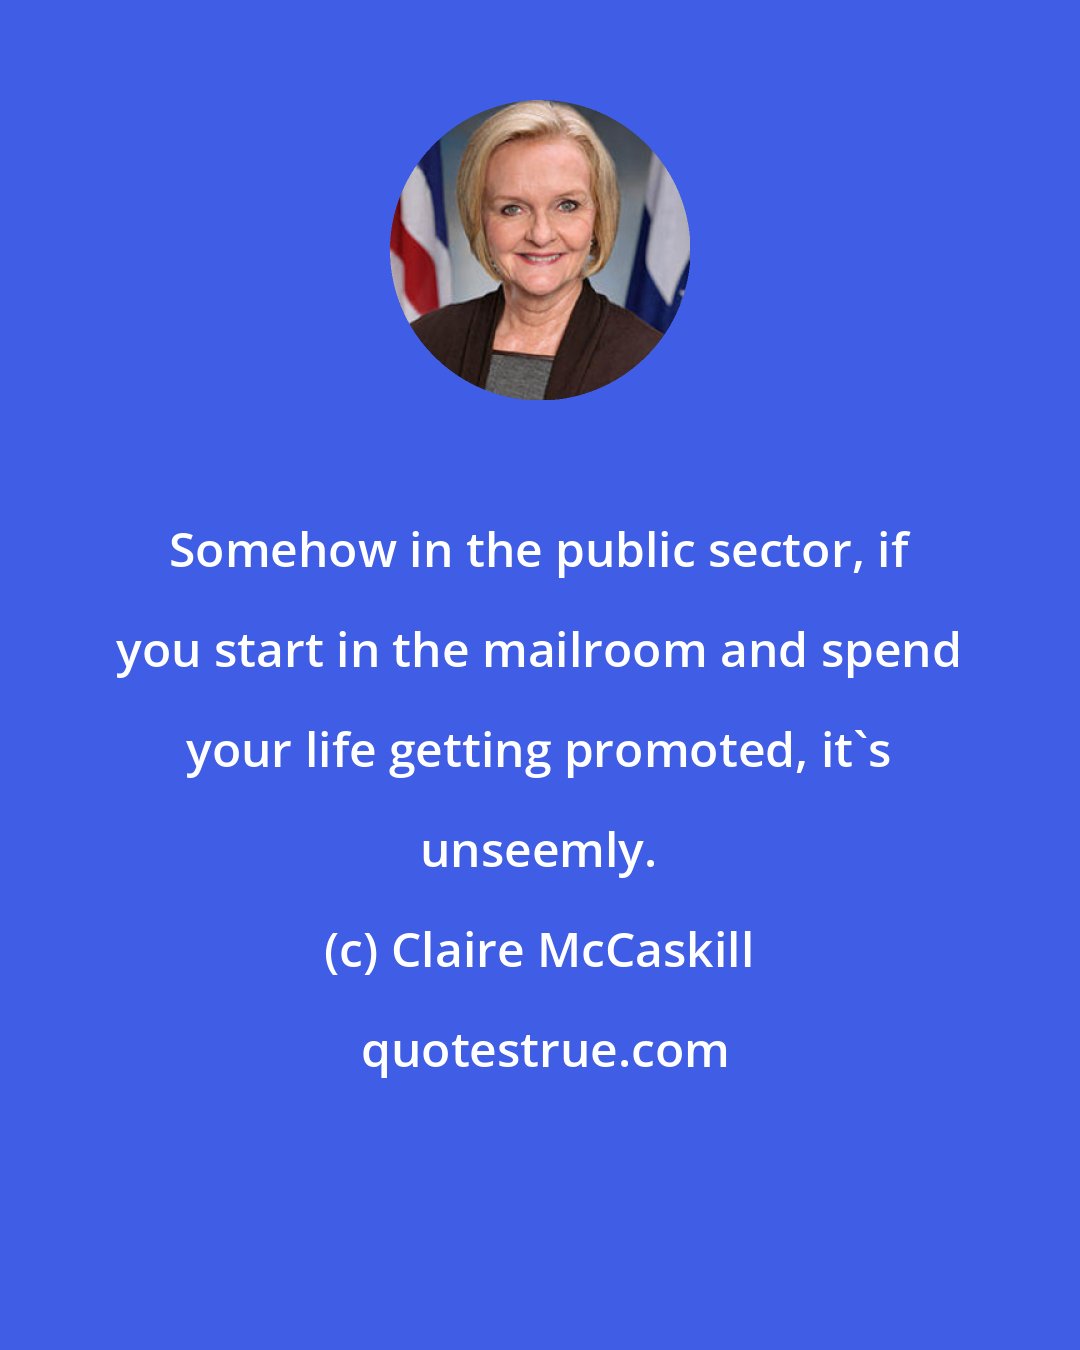 Claire McCaskill: Somehow in the public sector, if you start in the mailroom and spend your life getting promoted, it's unseemly.